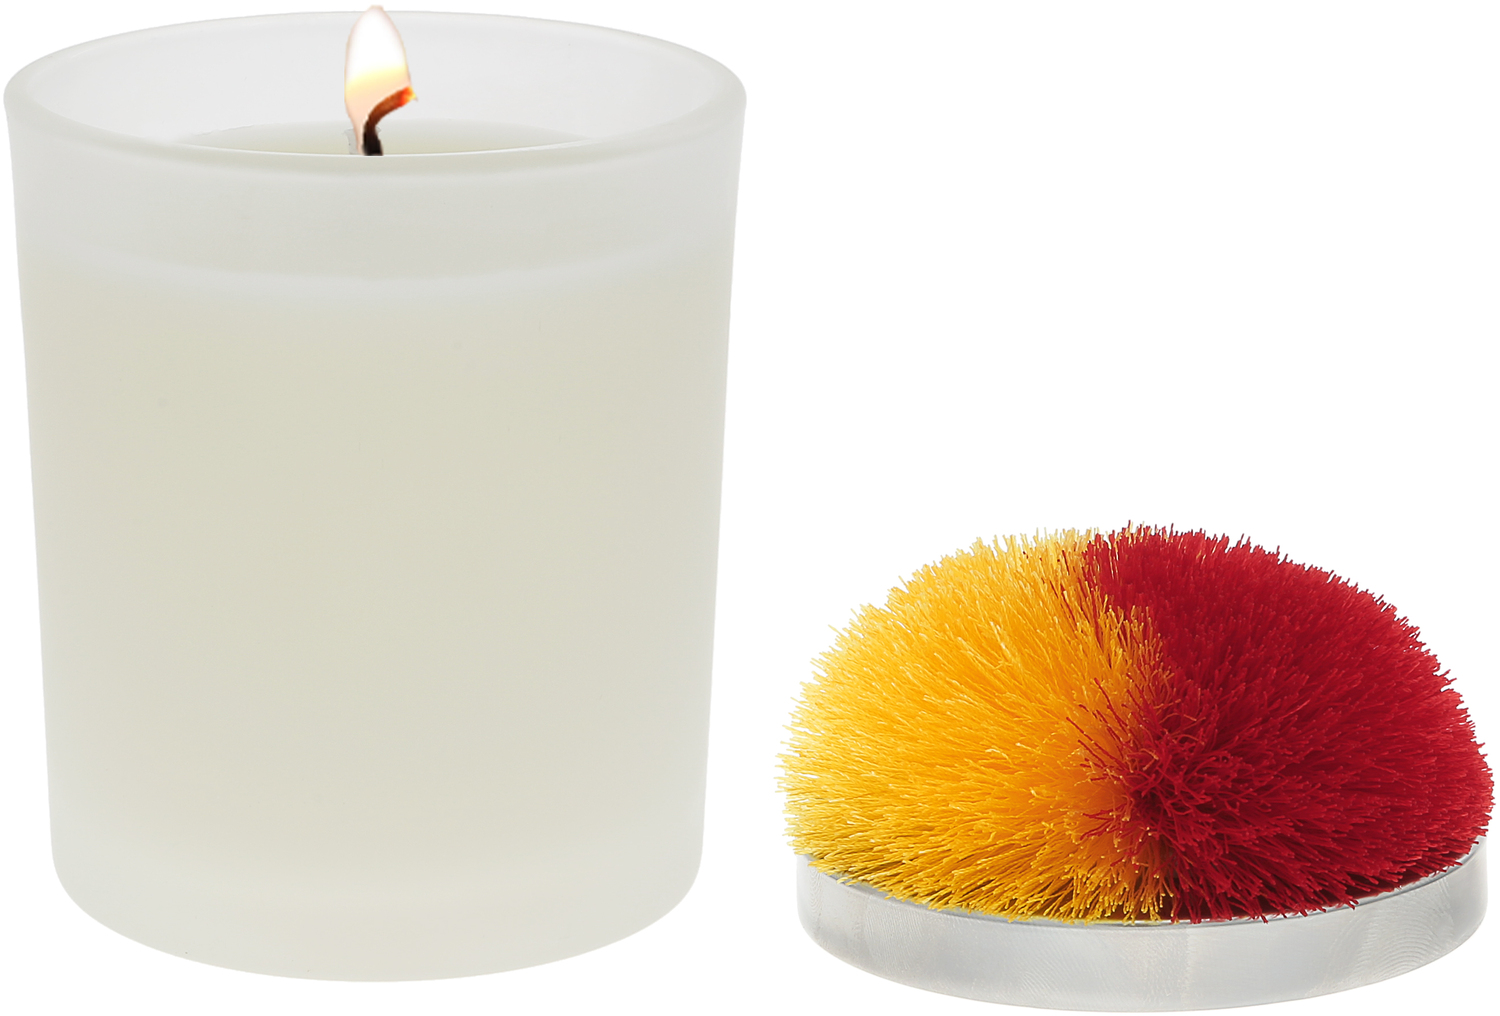 Blank - Red & Yellow by Repre-Scent - Blank - Red & Yellow - 5.5 oz - 100% Soy Wax Candle with Pom Pom Lid
Scent: Tranquility